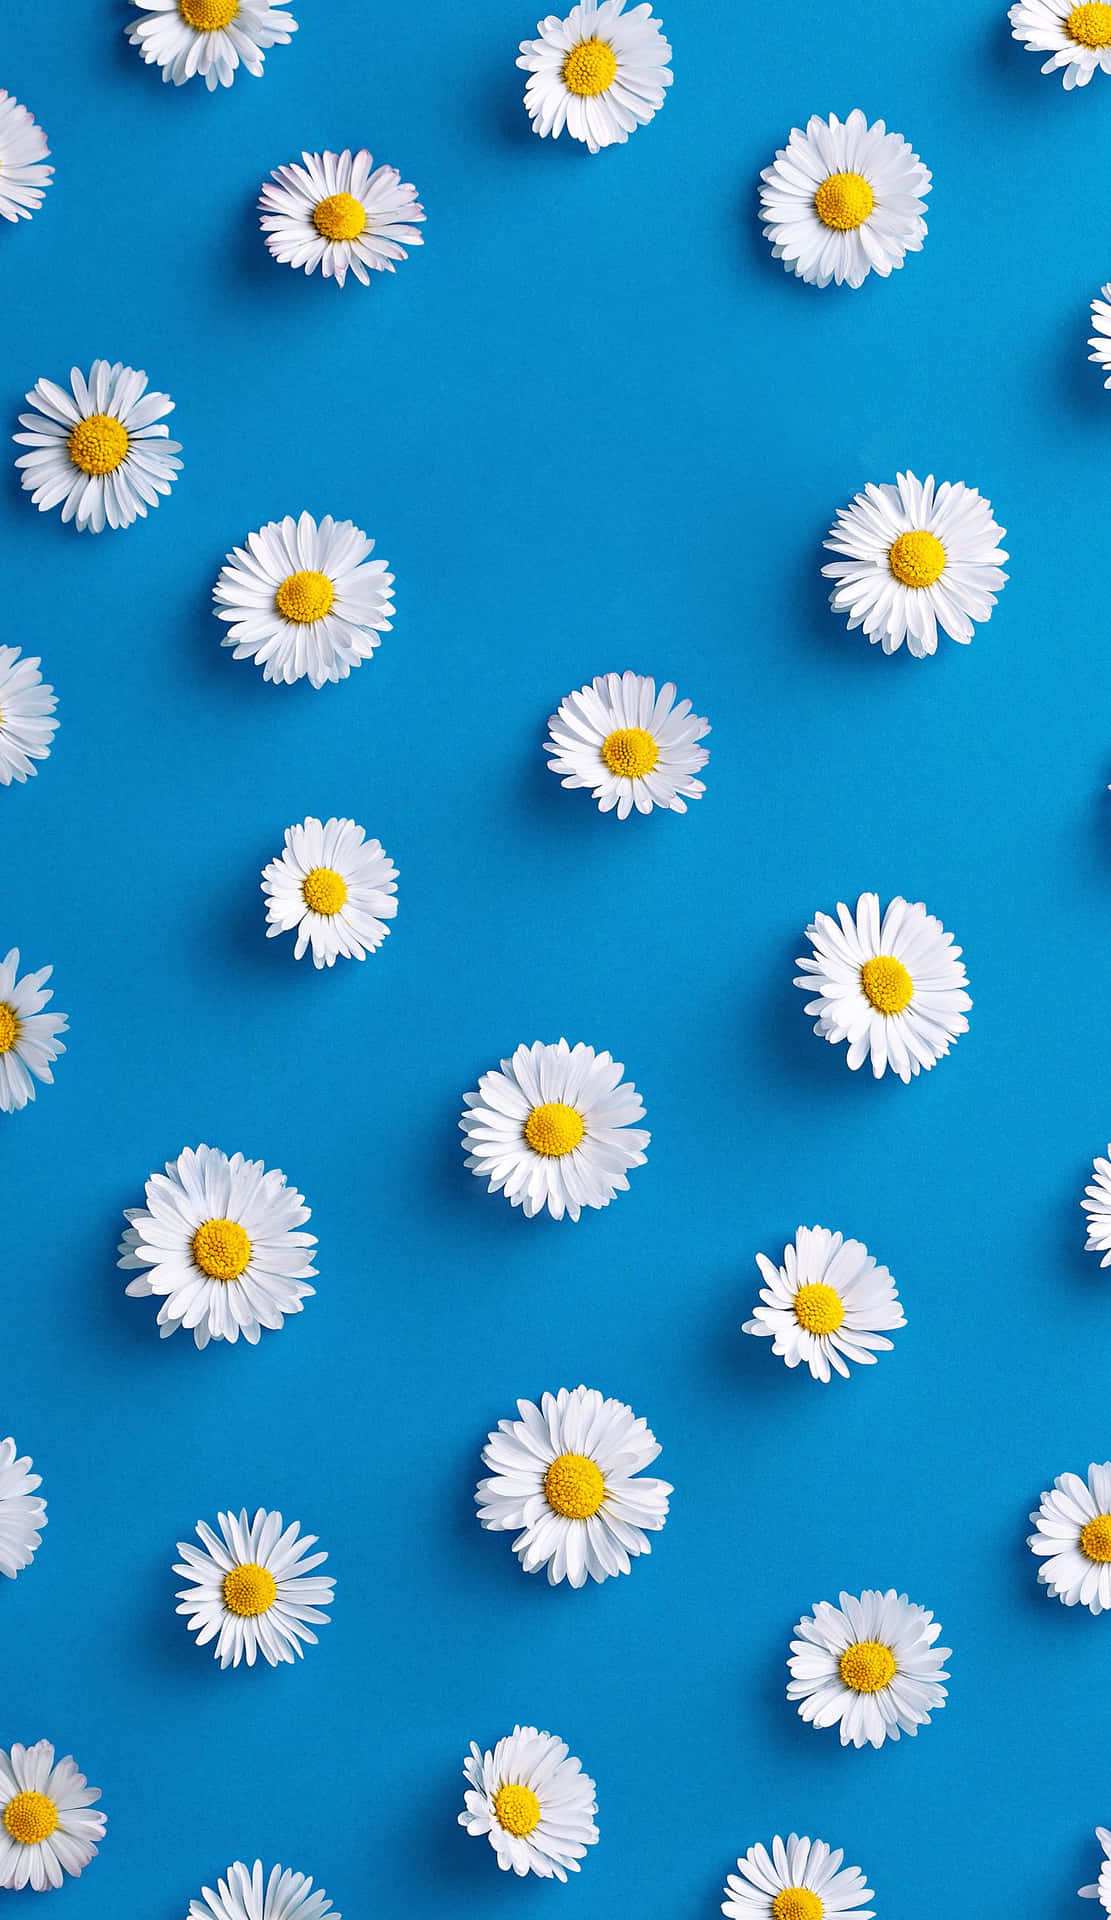 A Blue Background With White Daisies On It Wallpaper